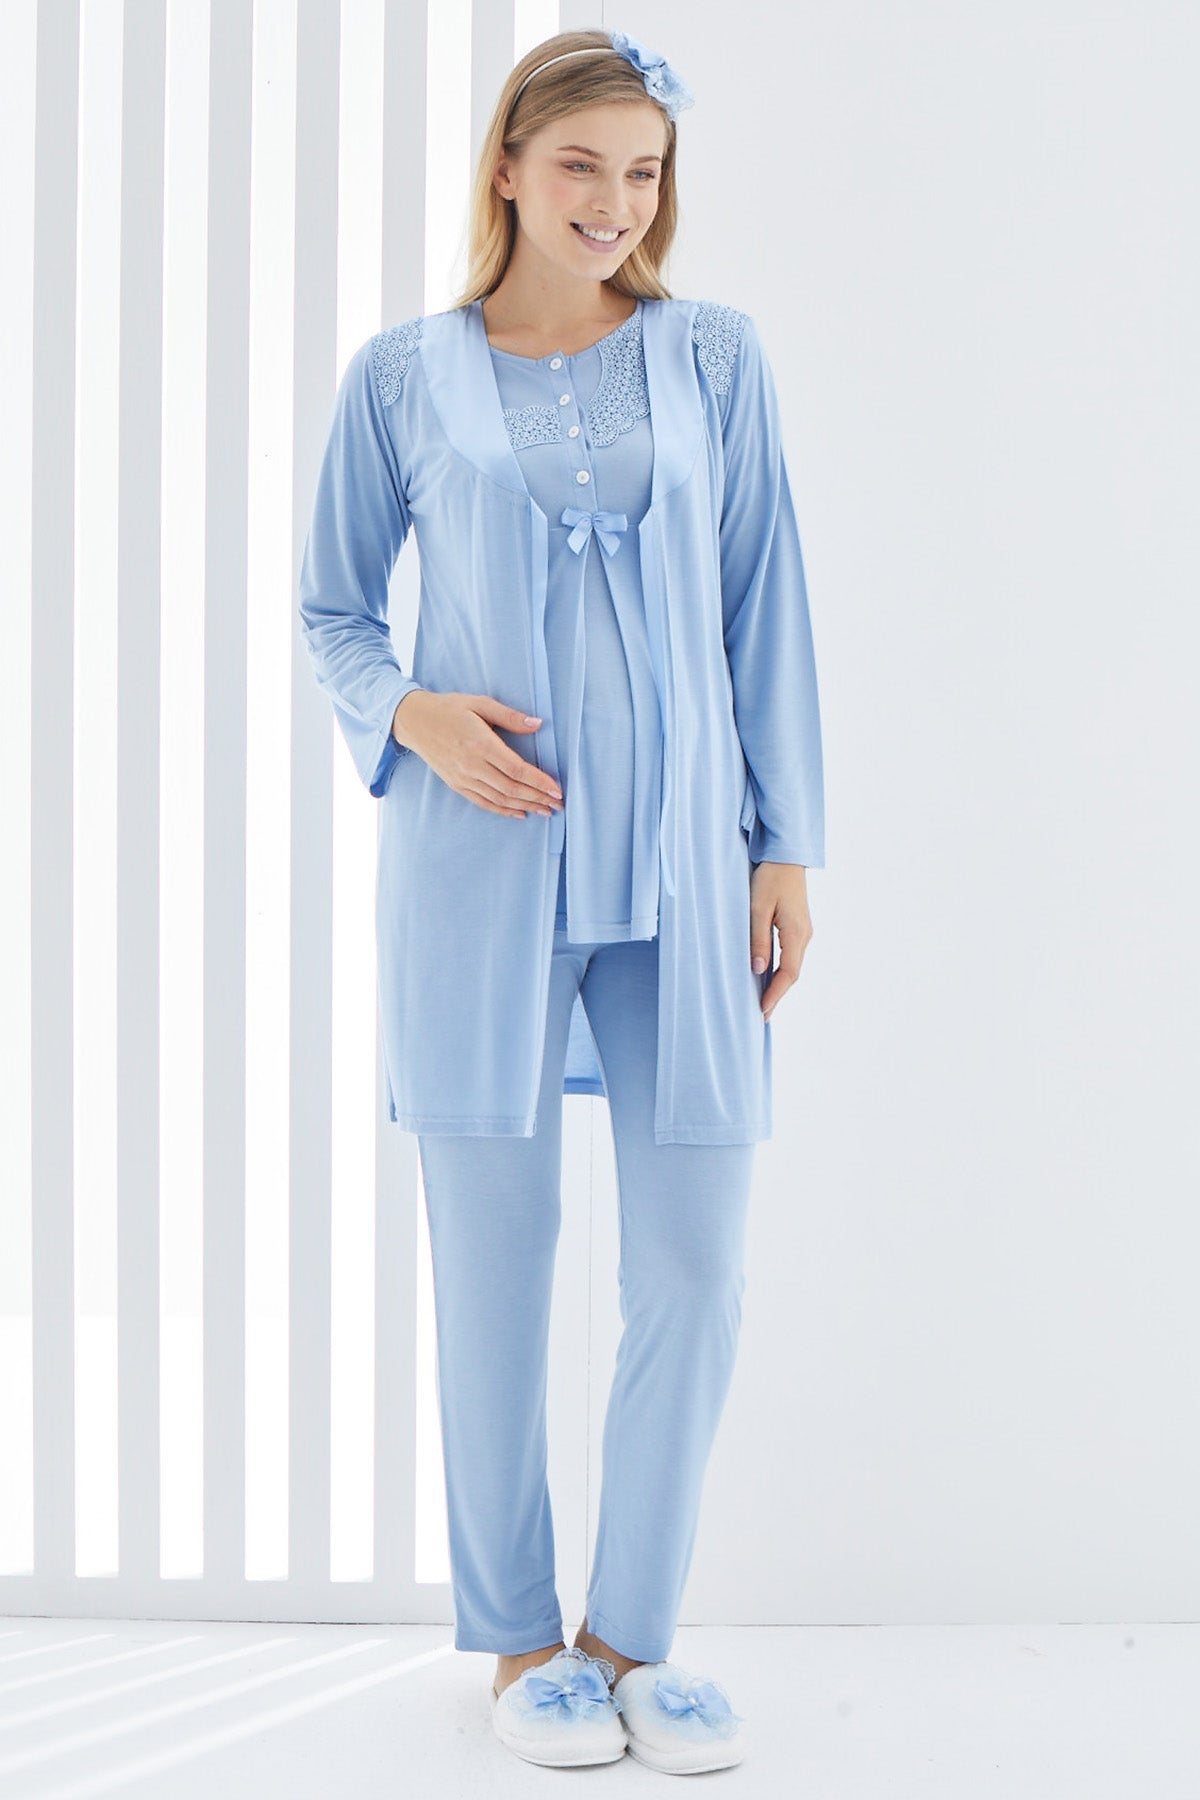 Shopymommy 3407 Guipure 3-Pieces Maternity & Nursing Pajamas With Robe Blue